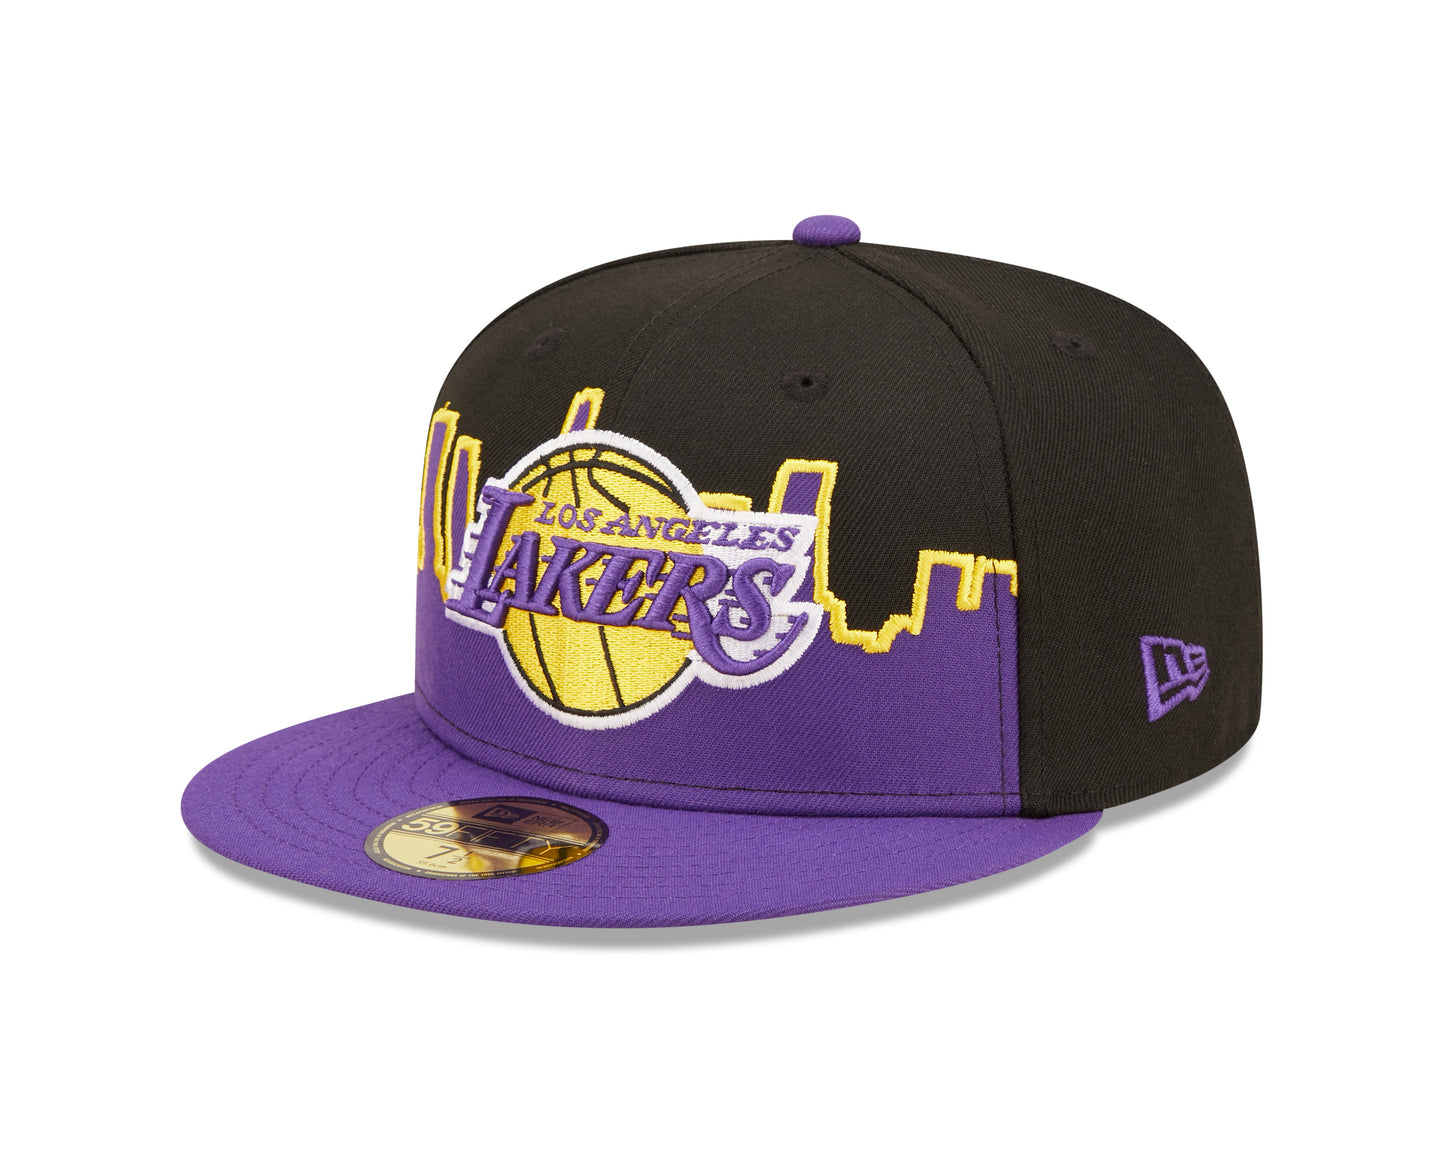 Los Angeles Lakers New Era NBA Tip Off 59fifty Hat - Black